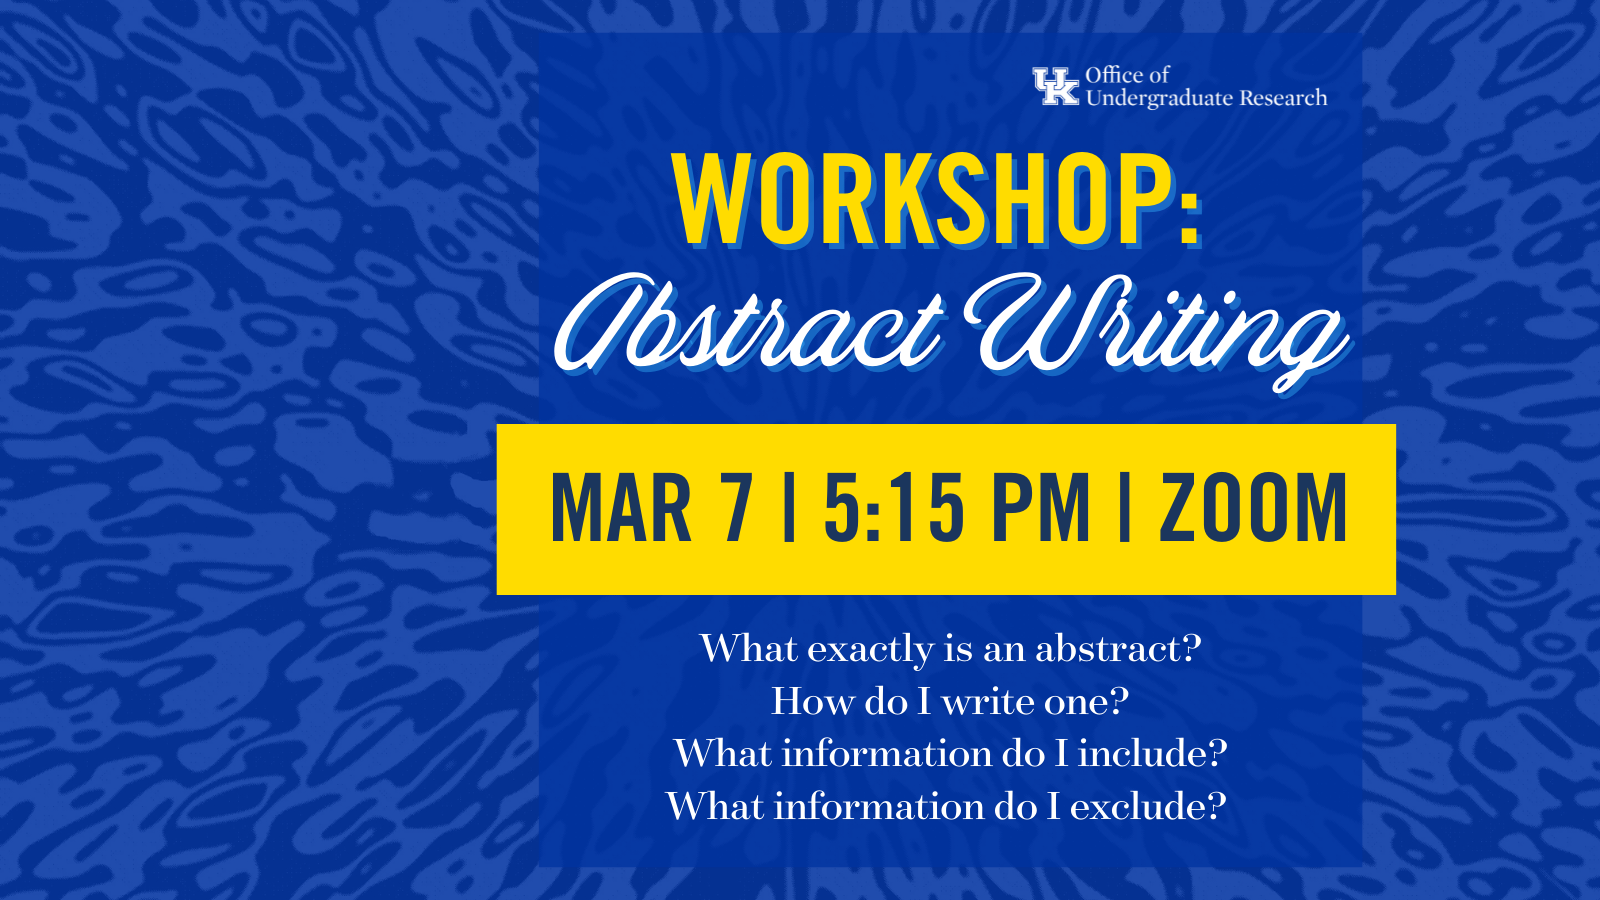 Graphic depicting Workshop: Abstract Writing on March 7, 2023 at 5:15 PM via Zoom